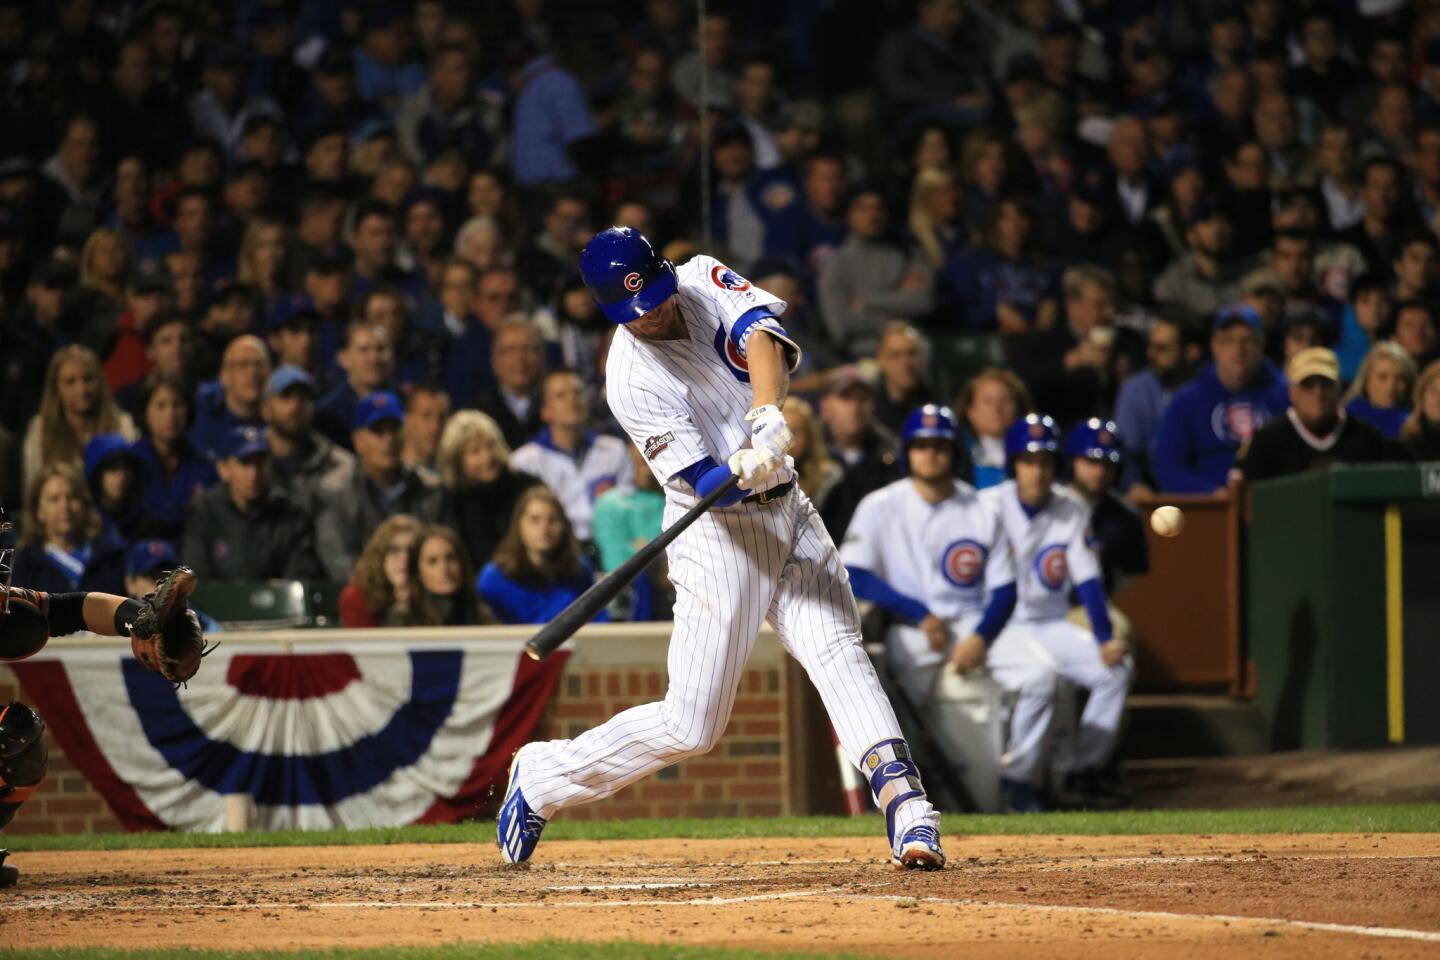 NLDS Game 1: Cubs 1, Giants 0